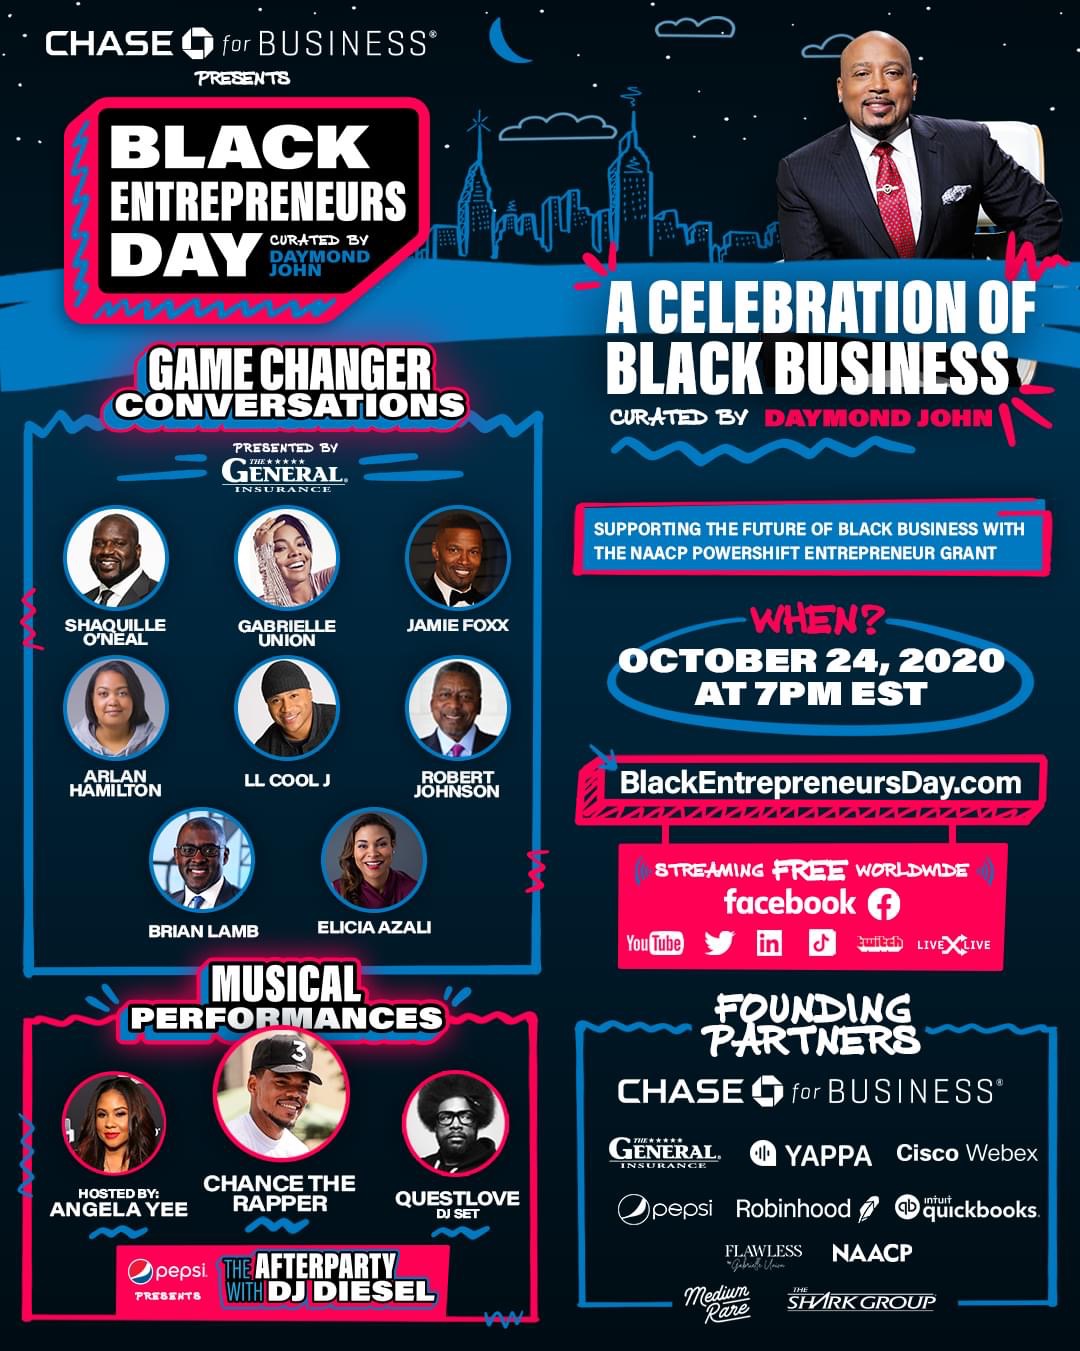 Learn more about Black Entrepreneurs Day